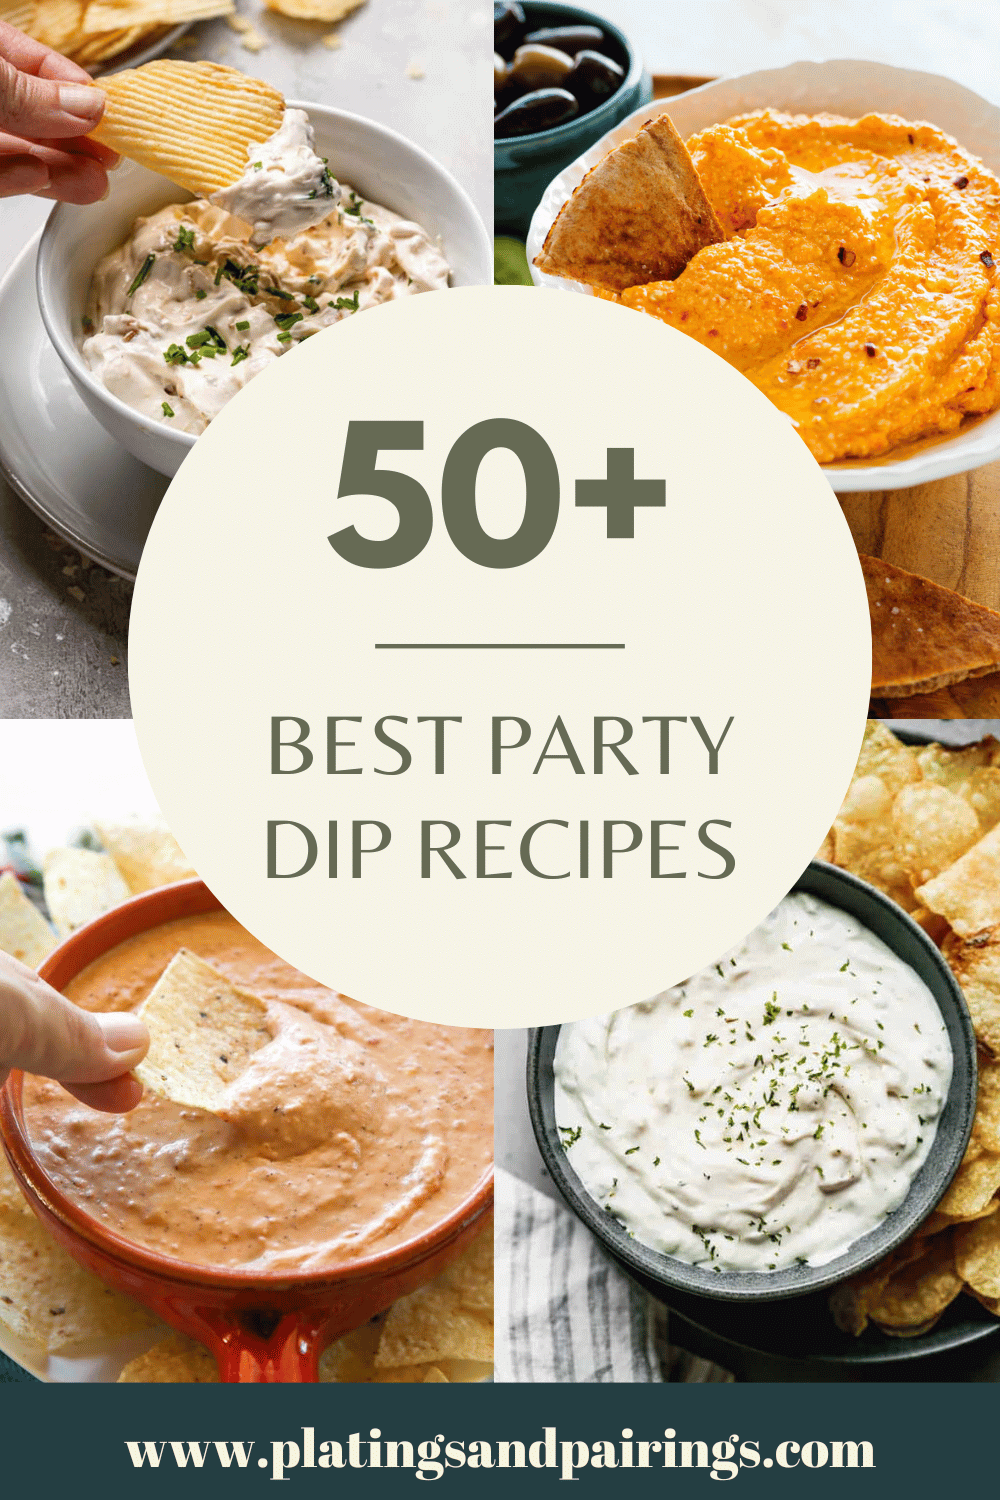 COLLAGE OF DIP RECIPES WITH TEXT OVERLAY.